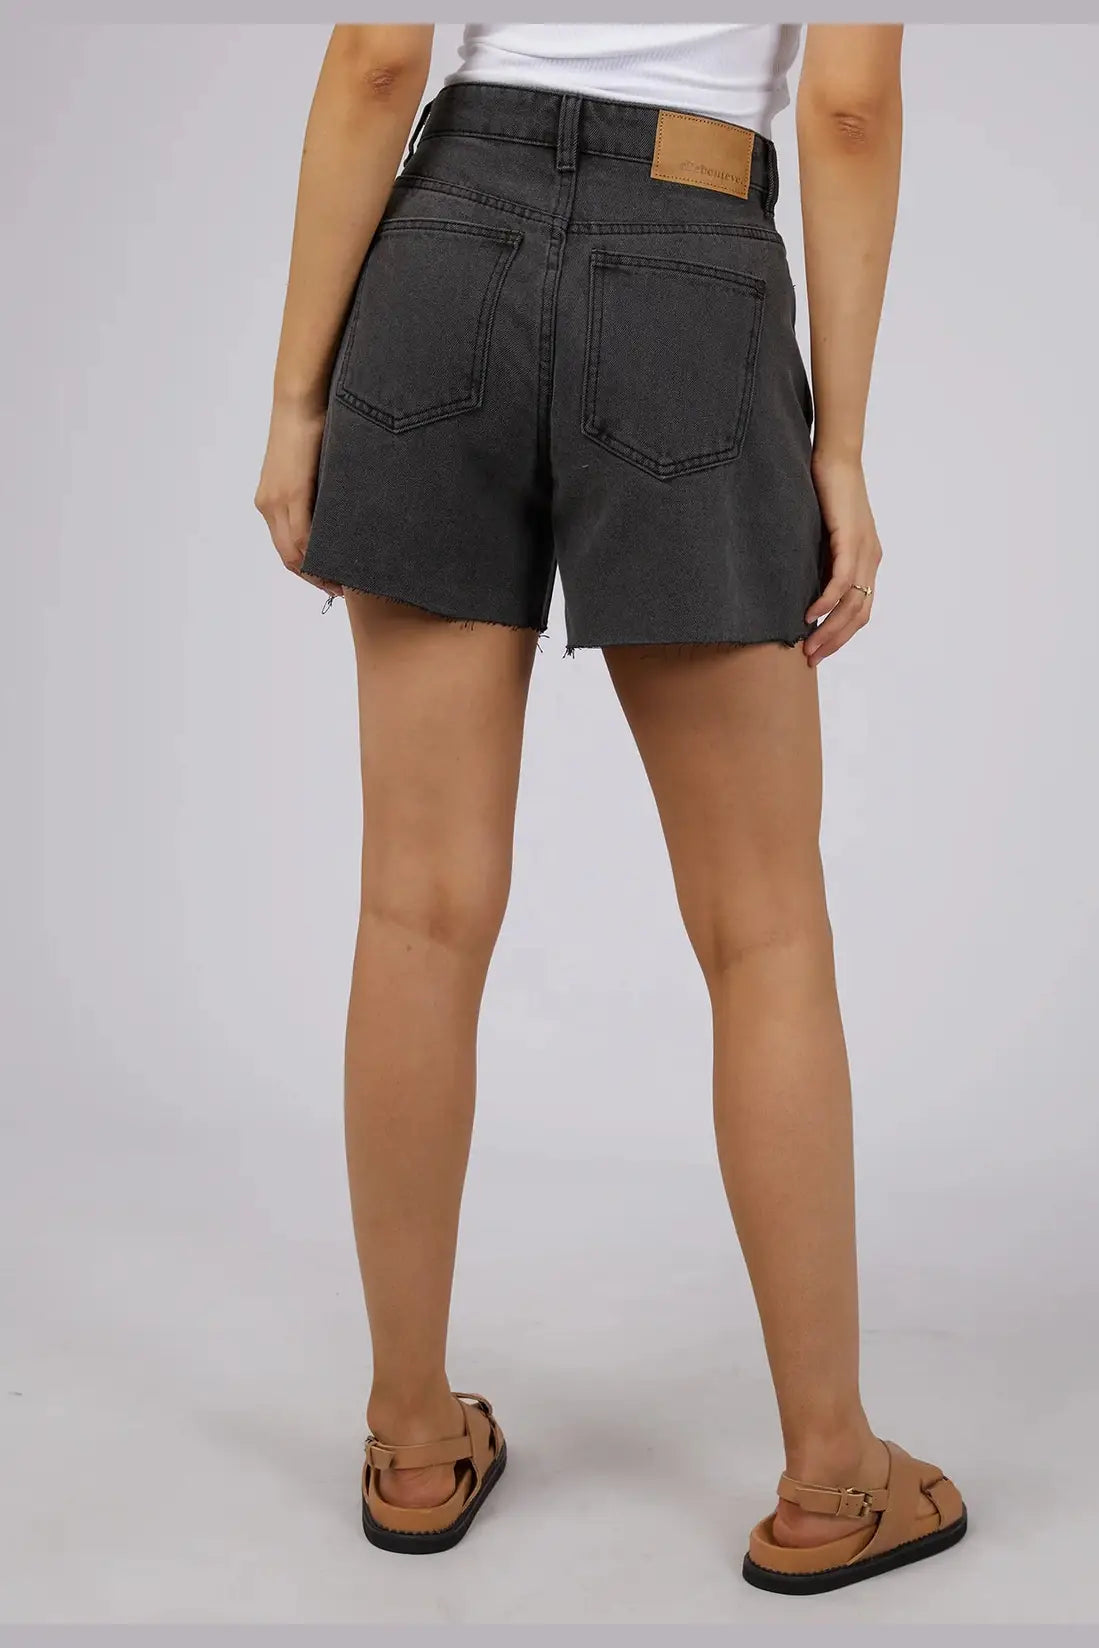 All About Eve Harley Bermuda Short - Washed Black